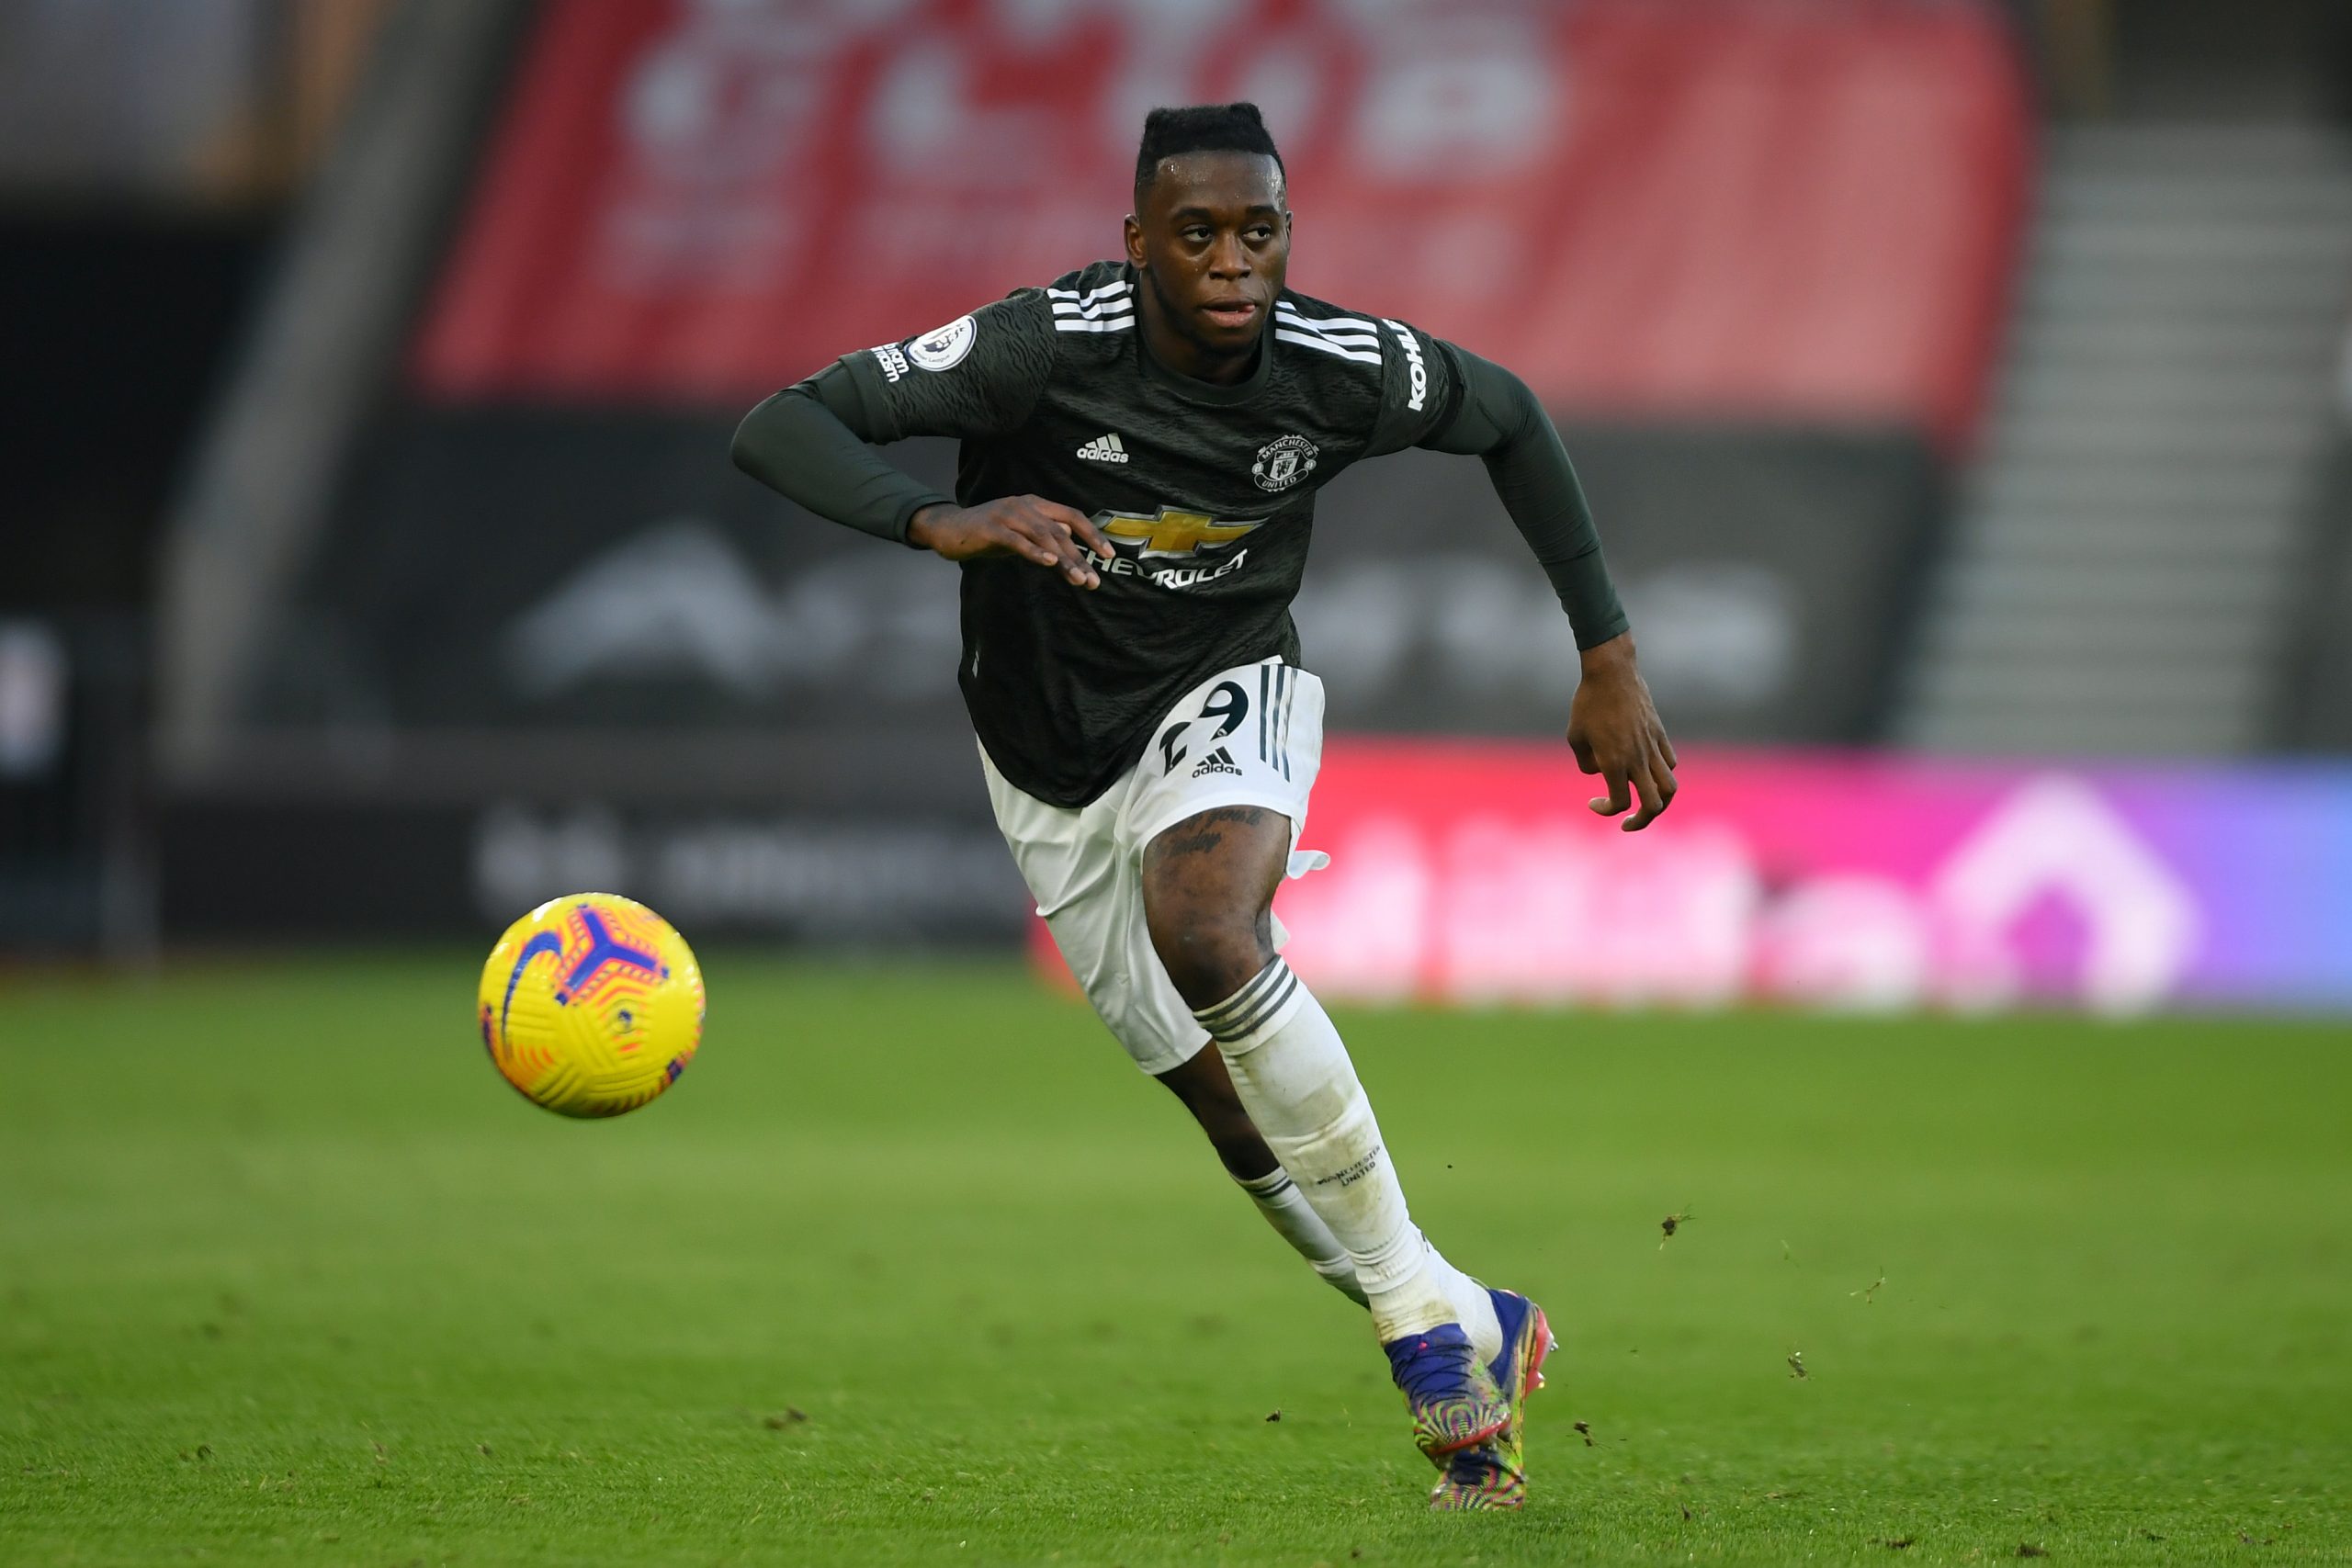 Manchester United turn down Crystal Palace and West Ham United approaches for Aaron Wan-Bissaka.